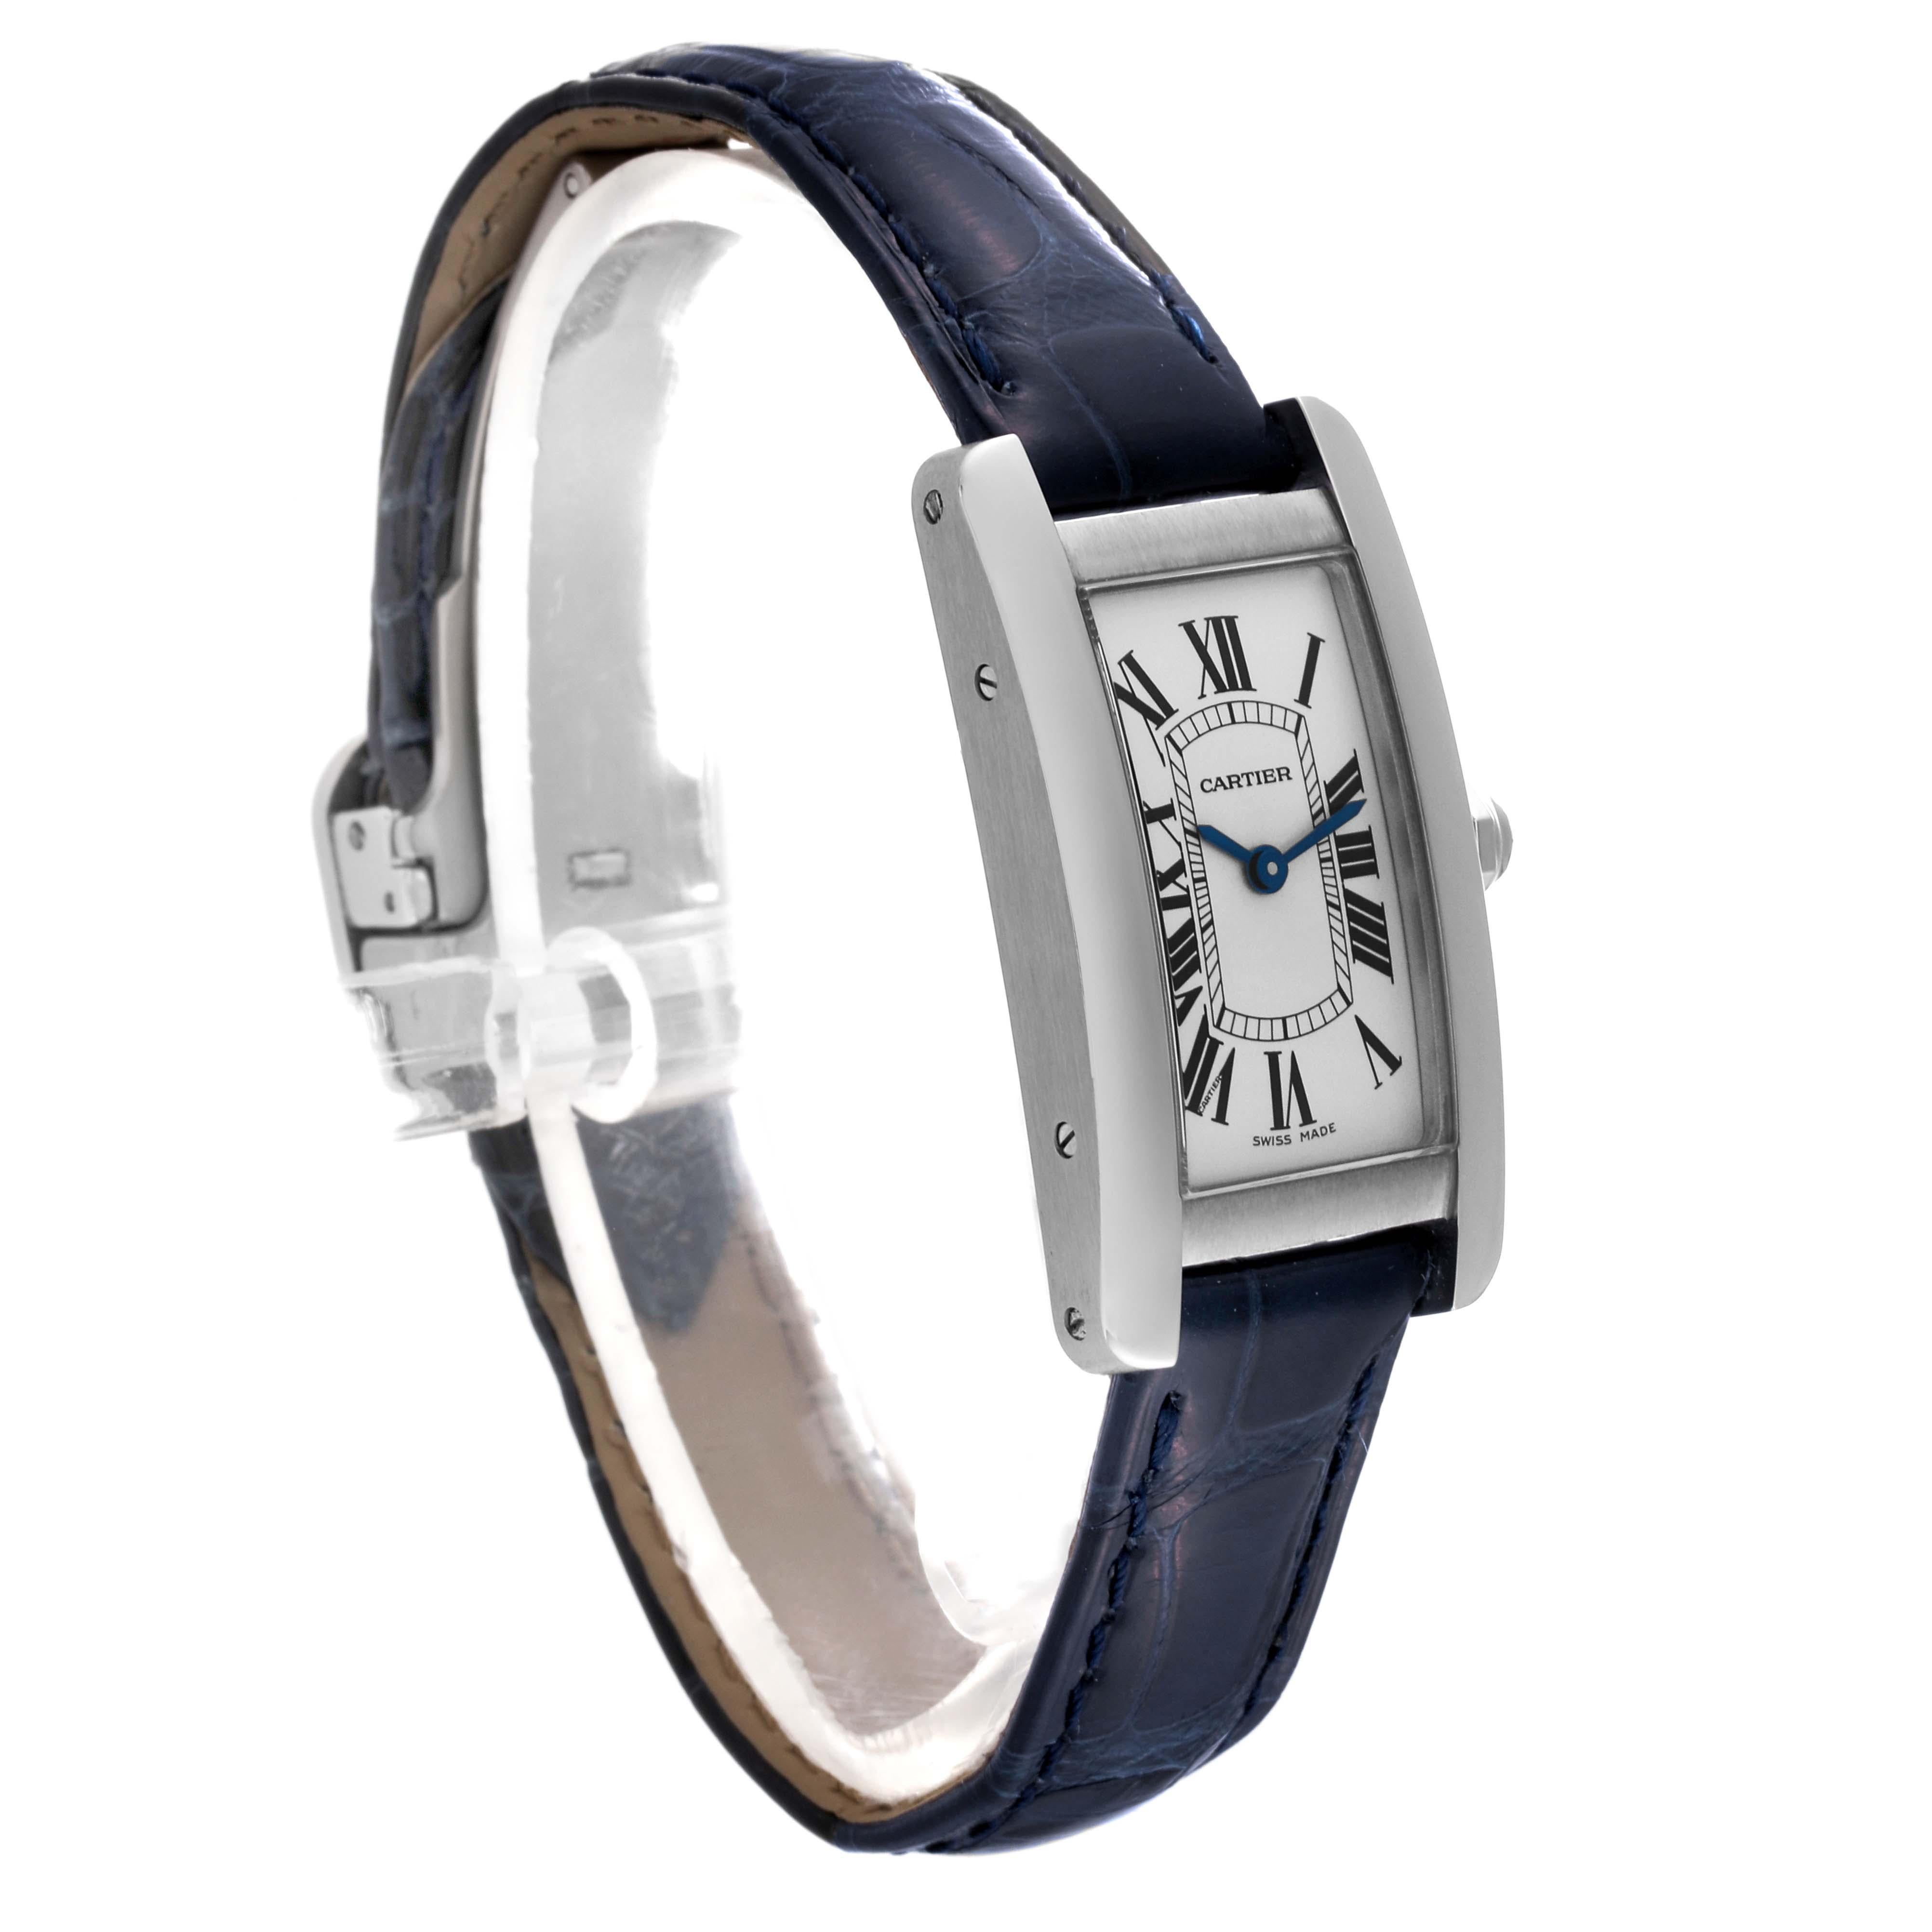 Cartier Tank Americaine Steel Silver Dial Ladies Watch WSTA0016 Box Papers. Quartz movement. Stainless steel case 34.8 mm x 19 mm. Circular grained crown set with faceted blue sapphire. . Scratch resistant sapphire crystal. Silvered dial with black